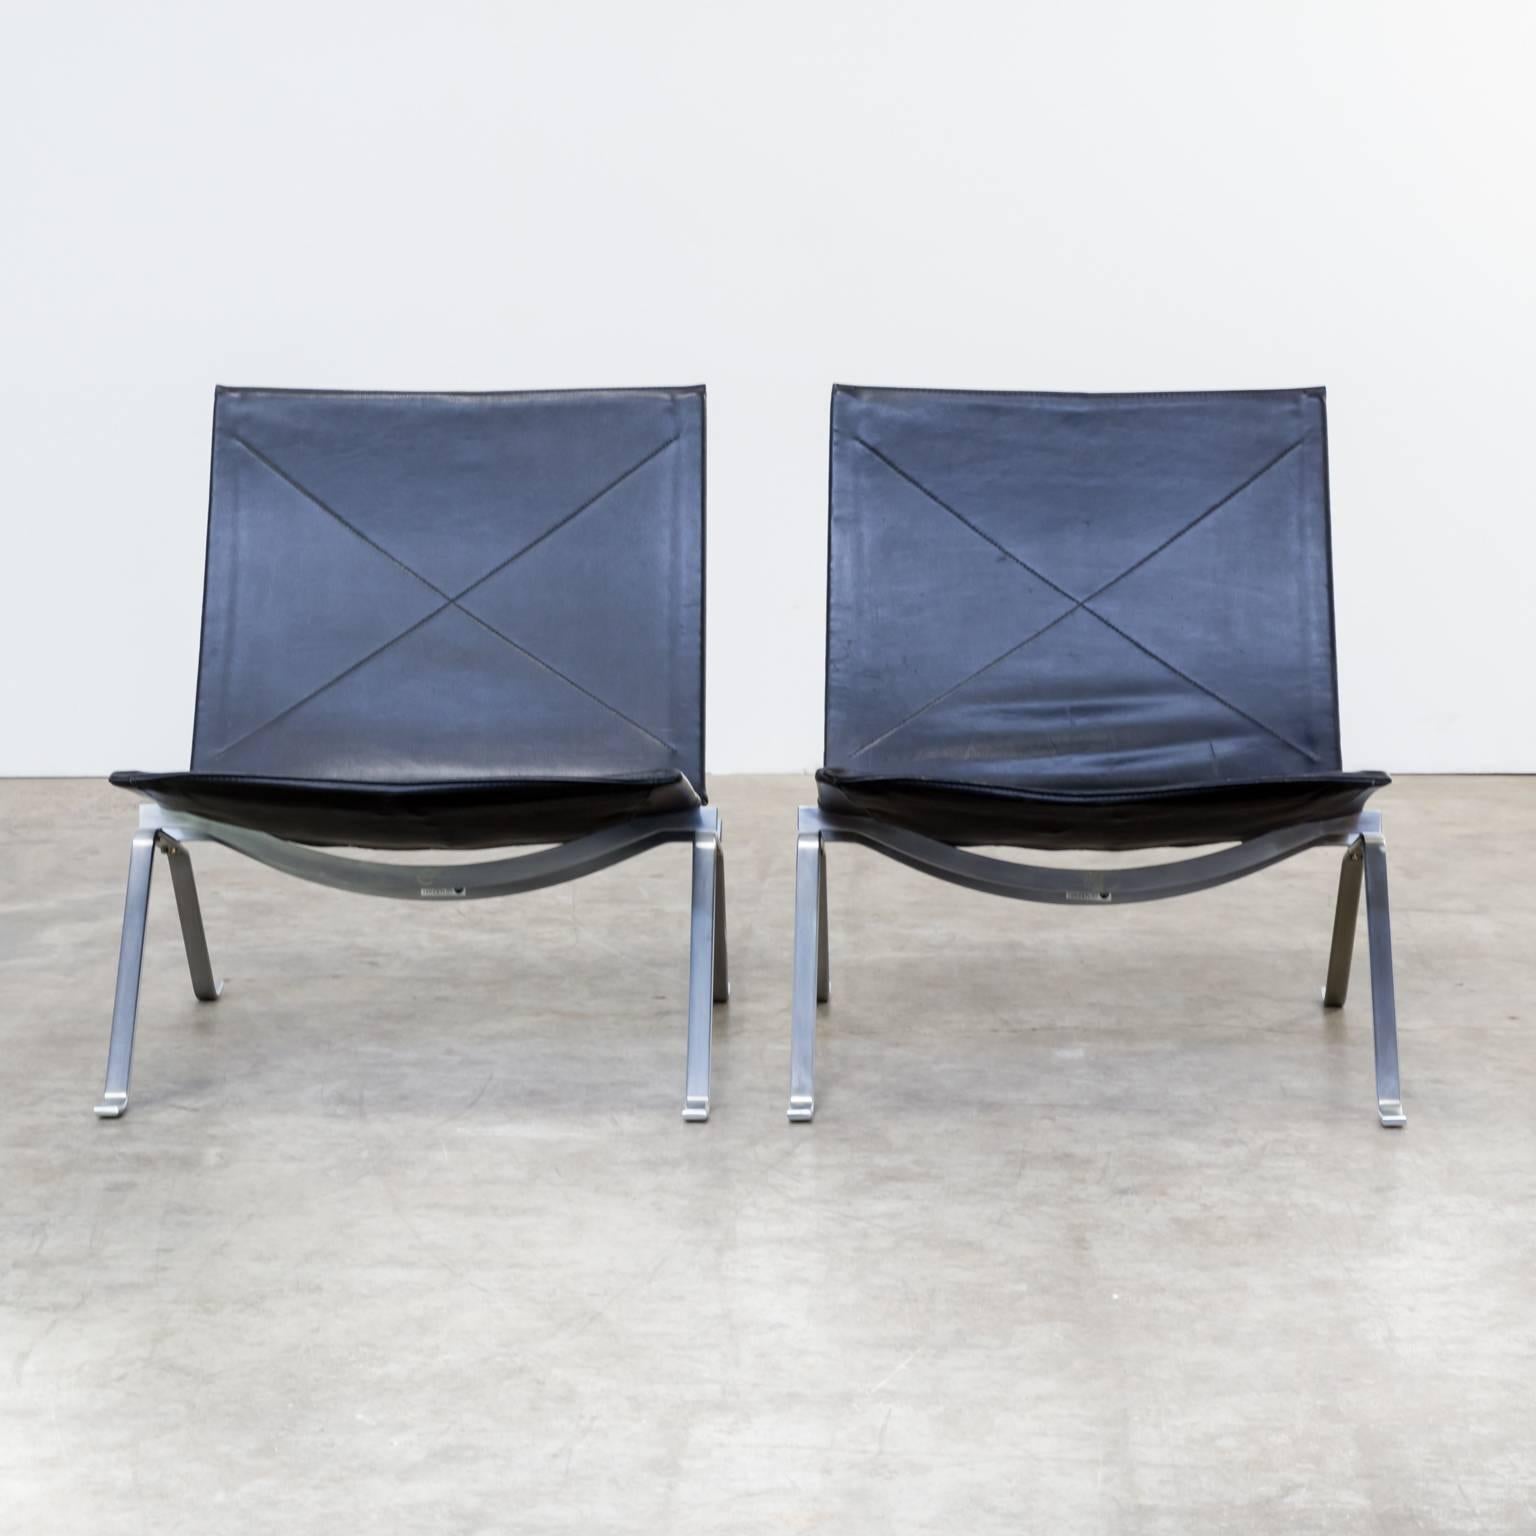 One set of two Poul Kjaerholm PK22 black leather fauteuils for Fritz Hansen. Poul Kjaerholm designed the PK22 fauteuil in 1956 for furniture manufacturer Fritz Hansen. Its reduced, Minimalist expression, communicates simple elegance and set a new